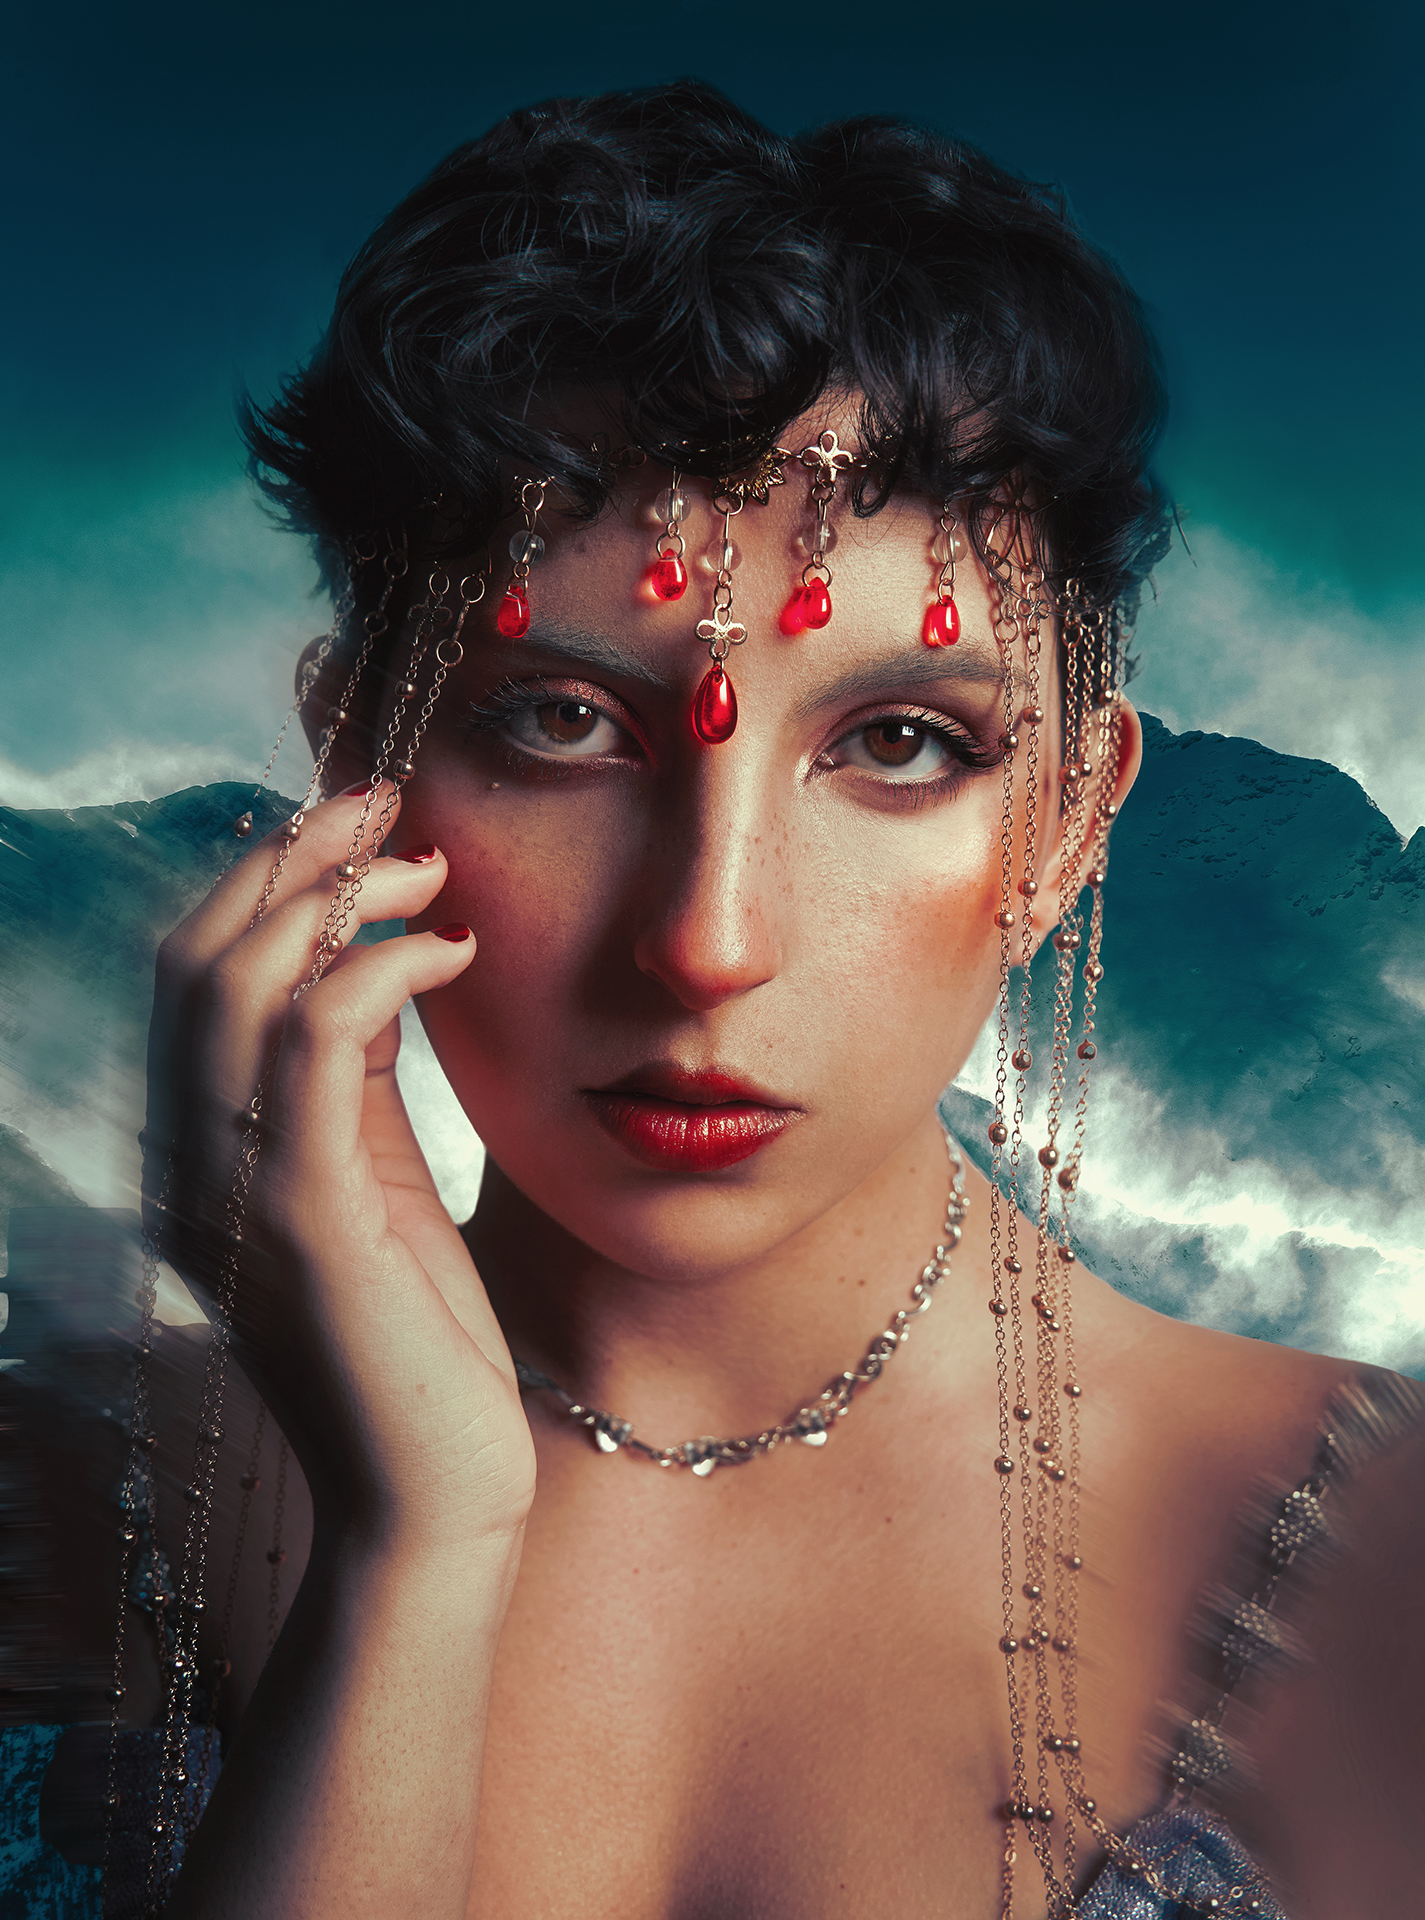 A close-up photo of a woman adorned with a red-jeweled headpiece. In the background is a blue mountainscape. There is motion-blur around her. She is strong and powerful.